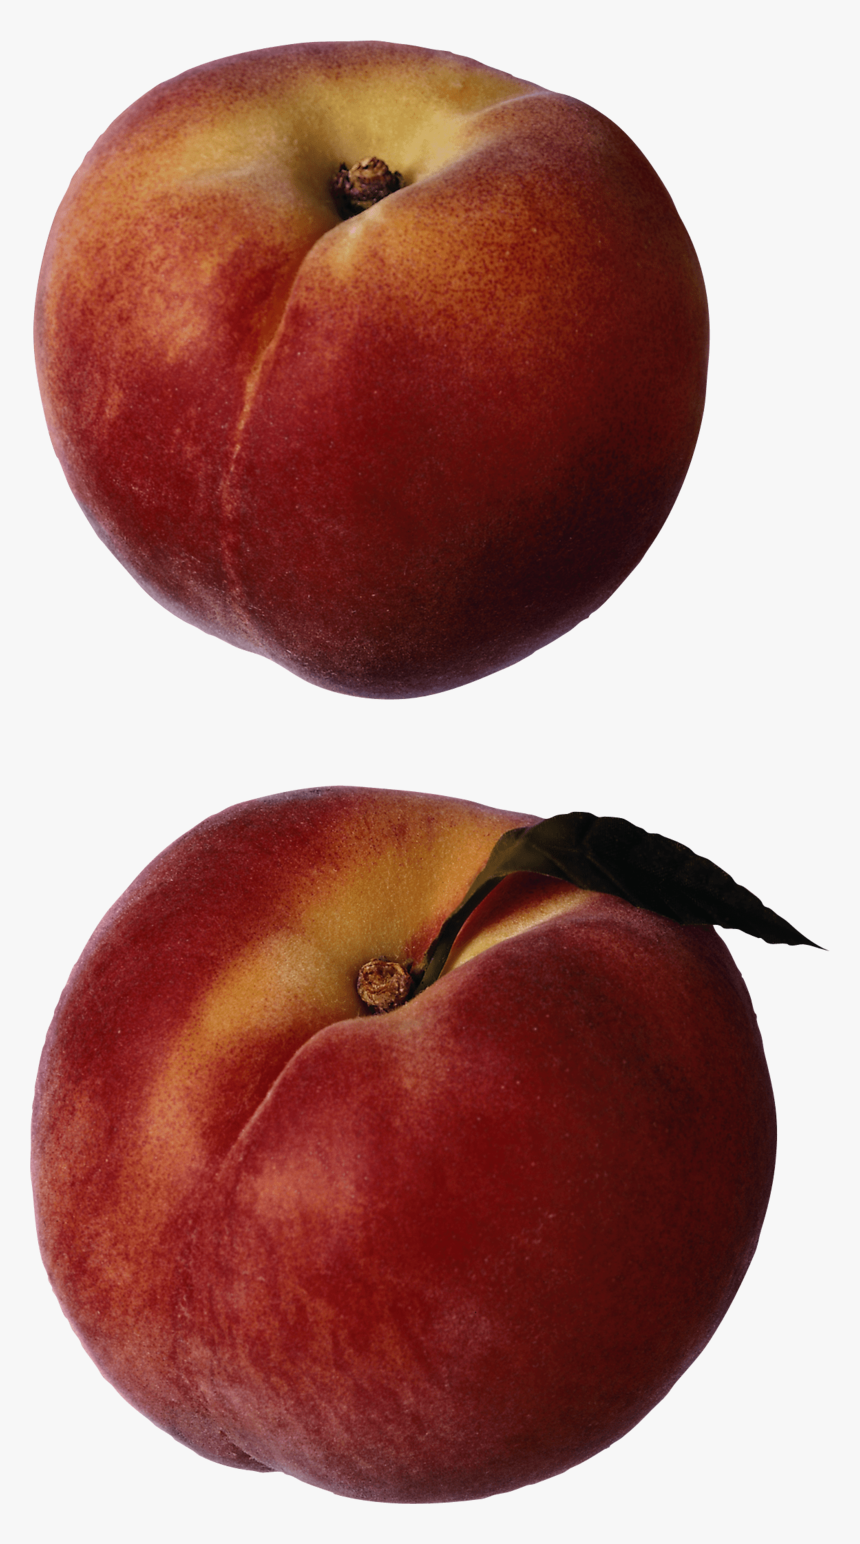 Peaches - Portable Network Graphics, HD Png Download, Free Download